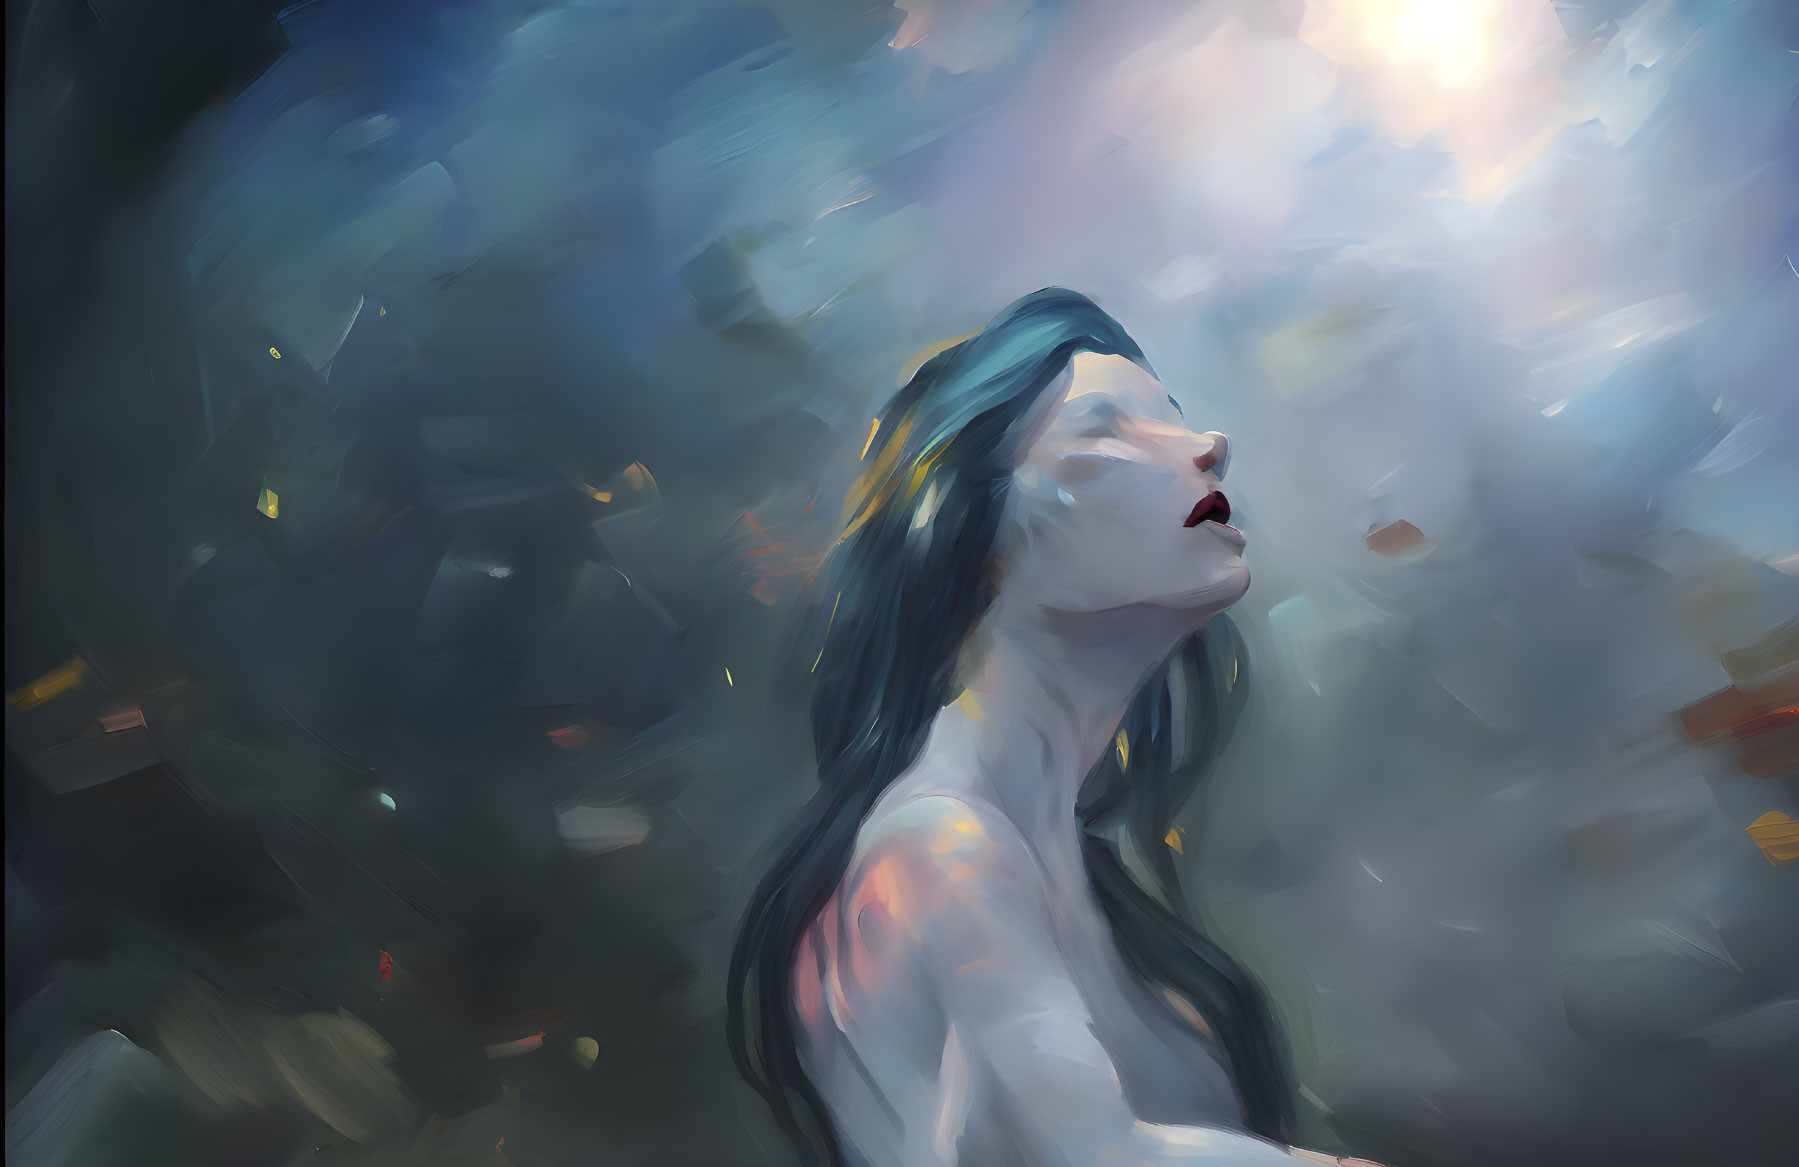 Dark-haired woman in ethereal blue and warm glows gazes upward